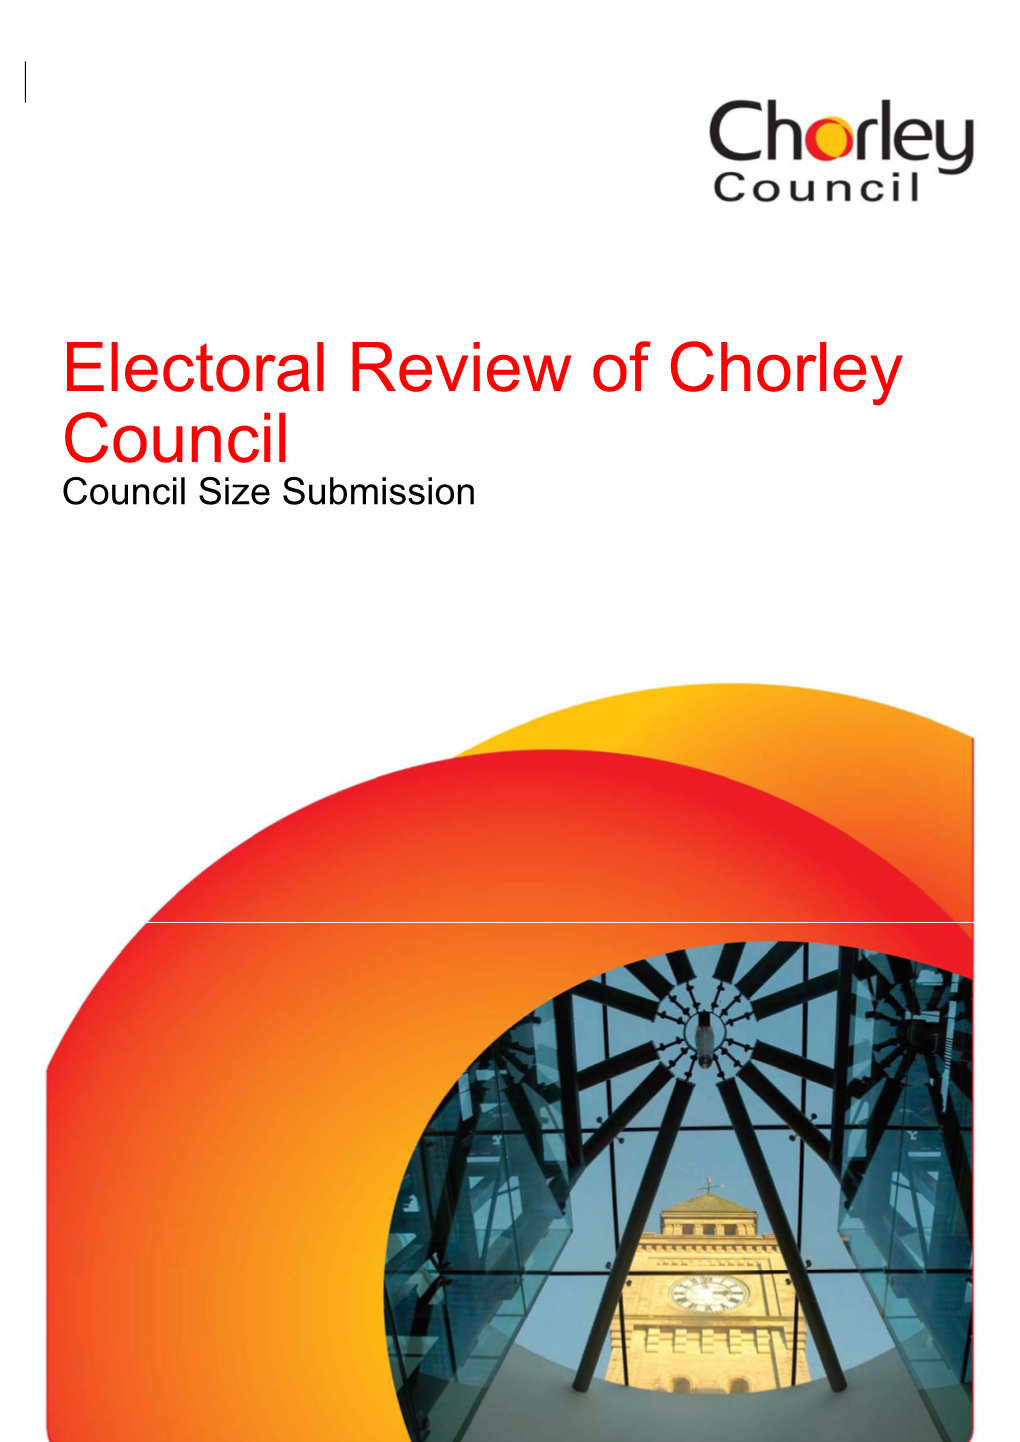 Chorley Council Council Size Submission